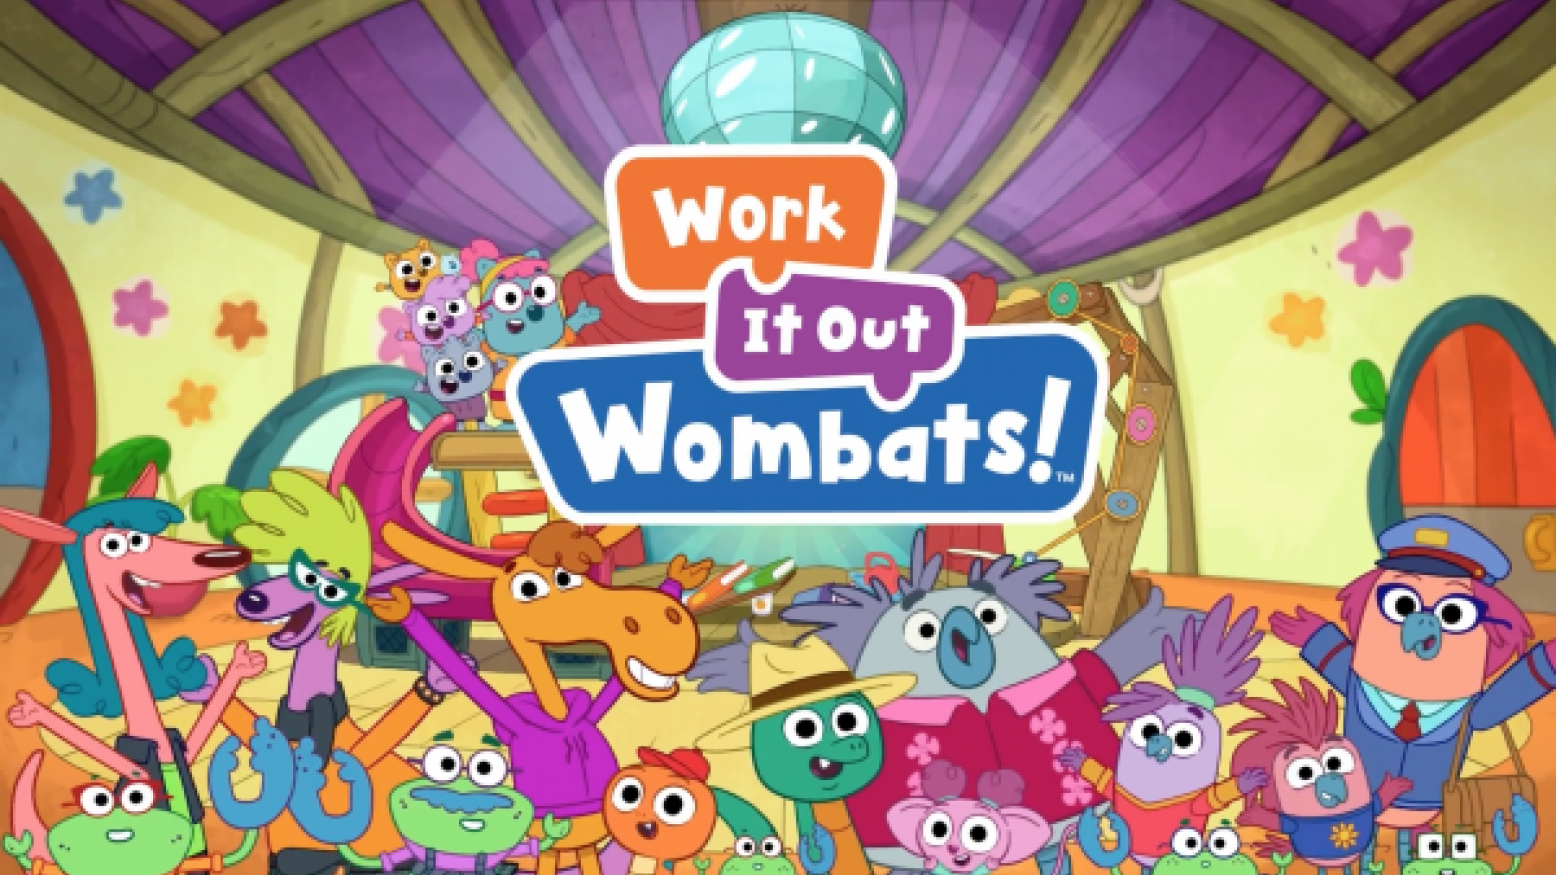 Colorful cartoon animals with text Work it Out Wombats